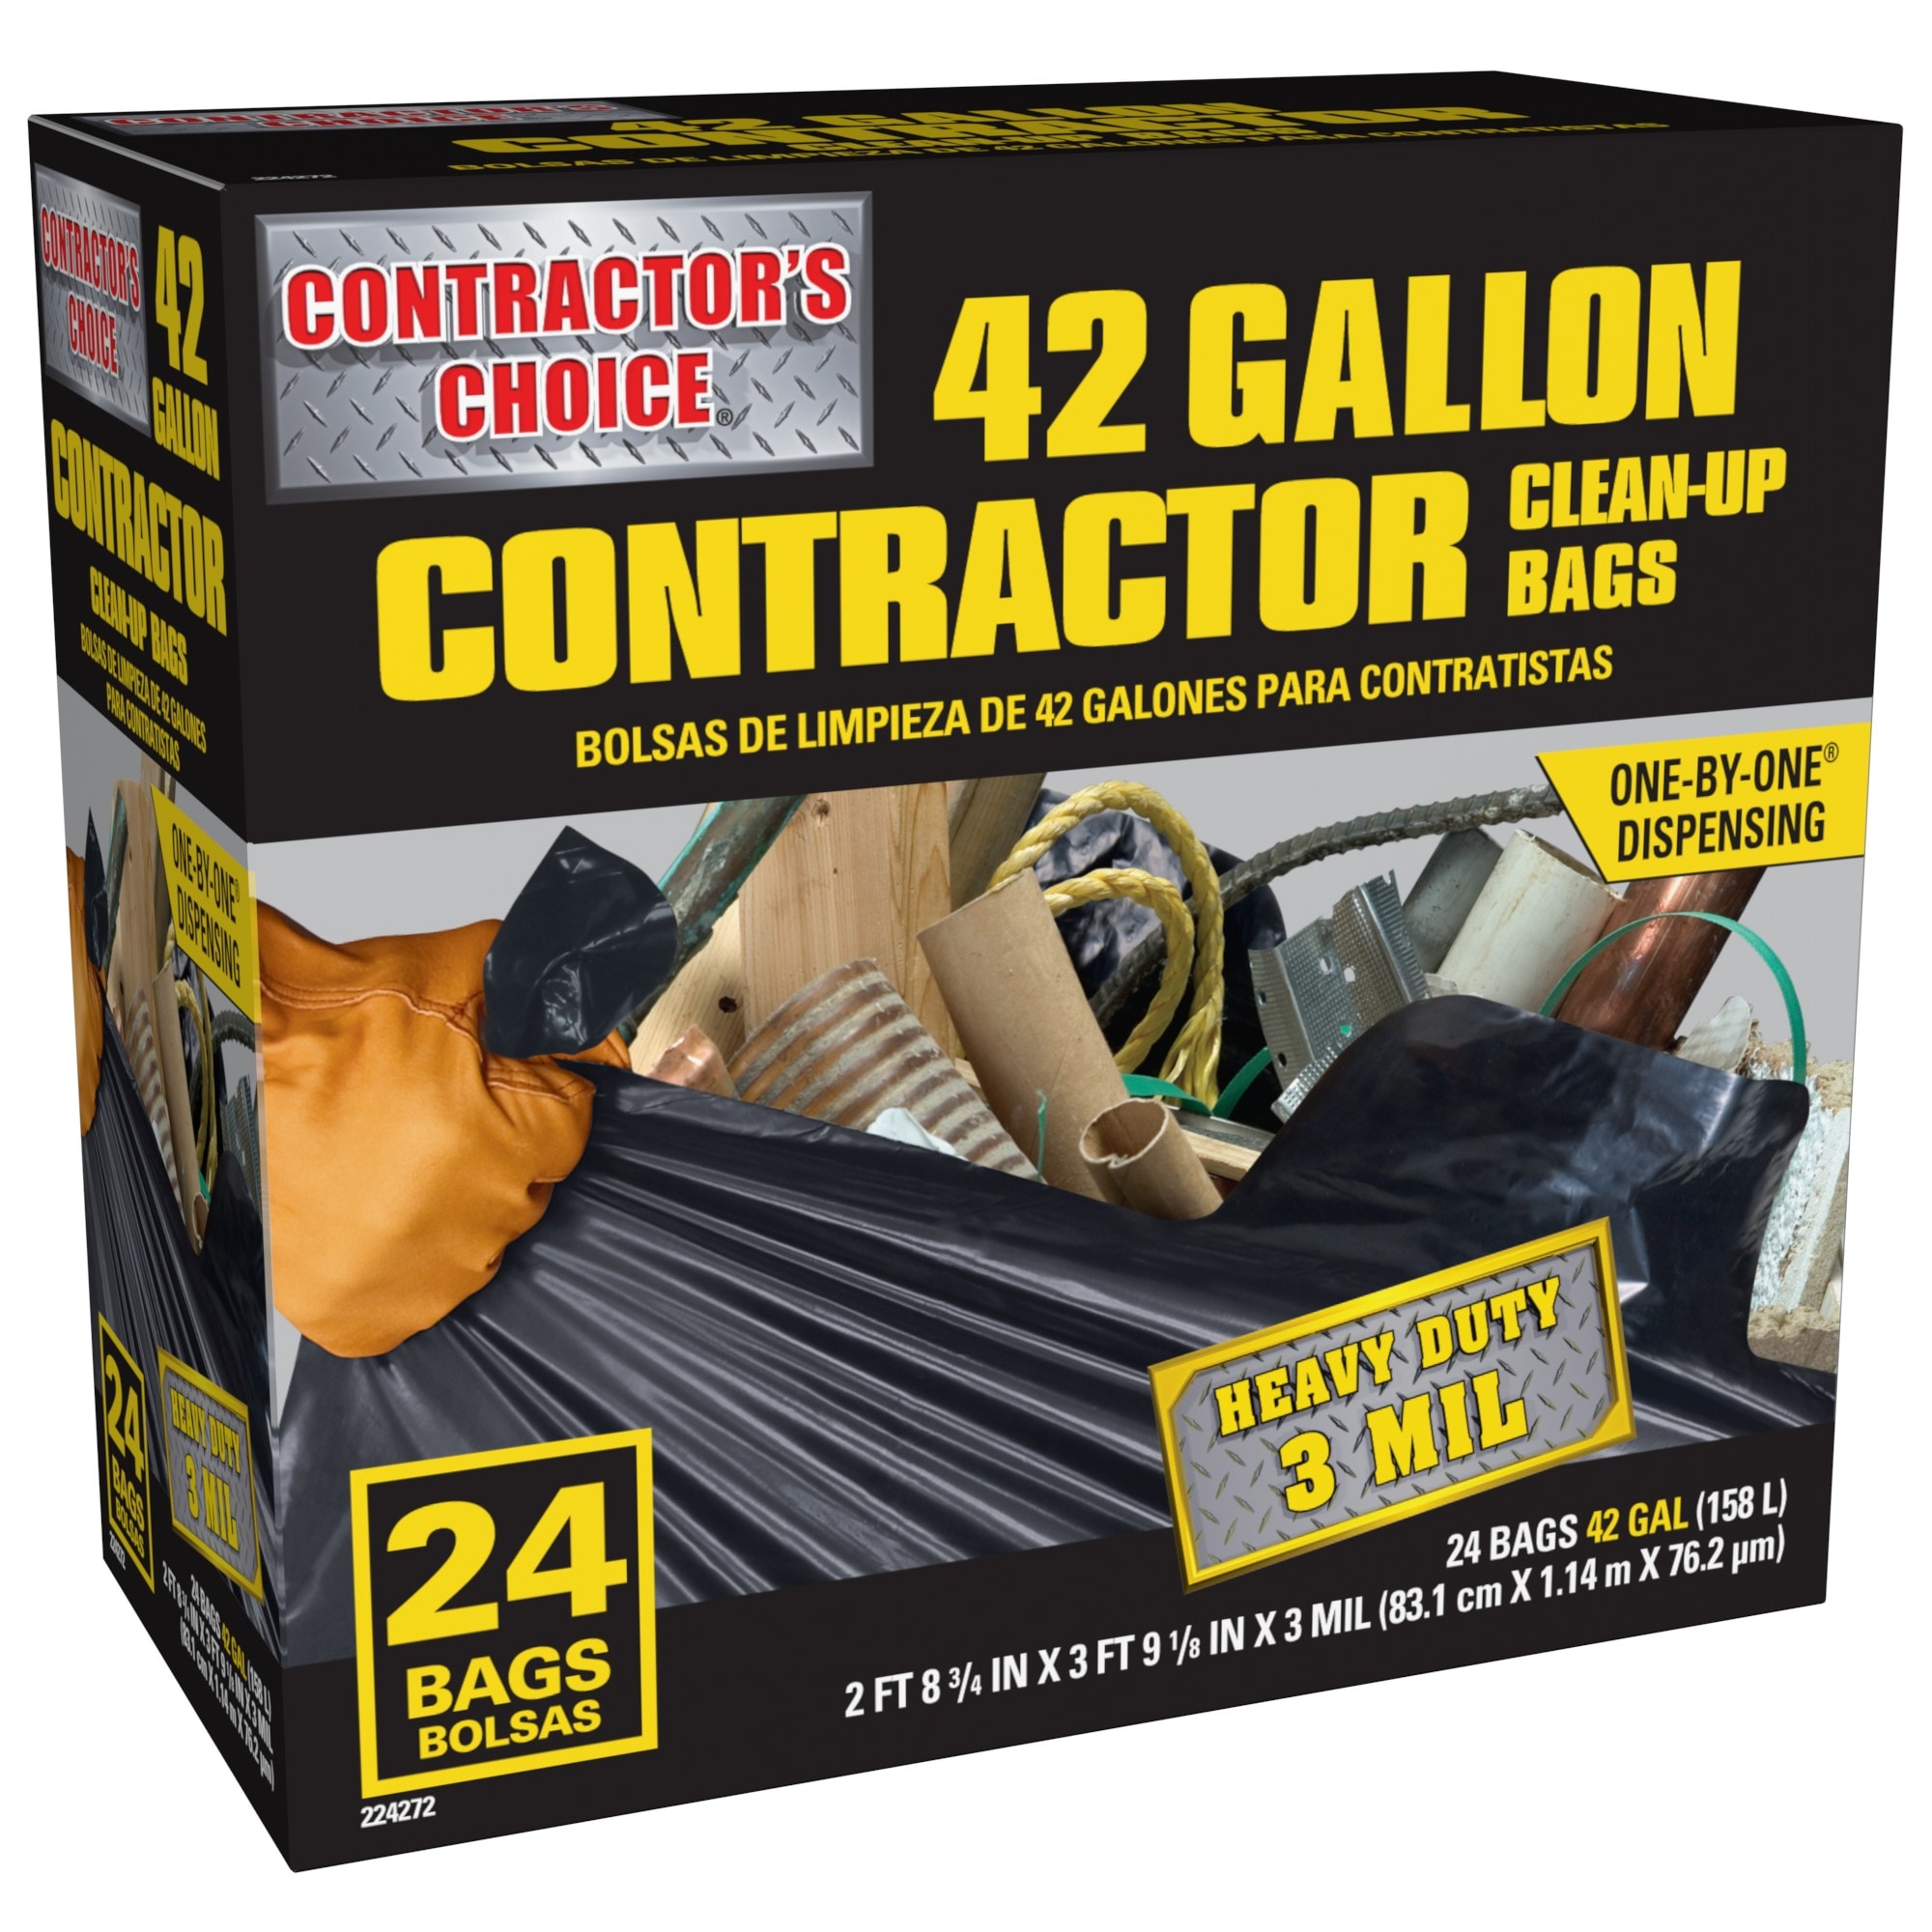 Contractors Choice Clean-Up Bags, 42 Gallon - 24 bags